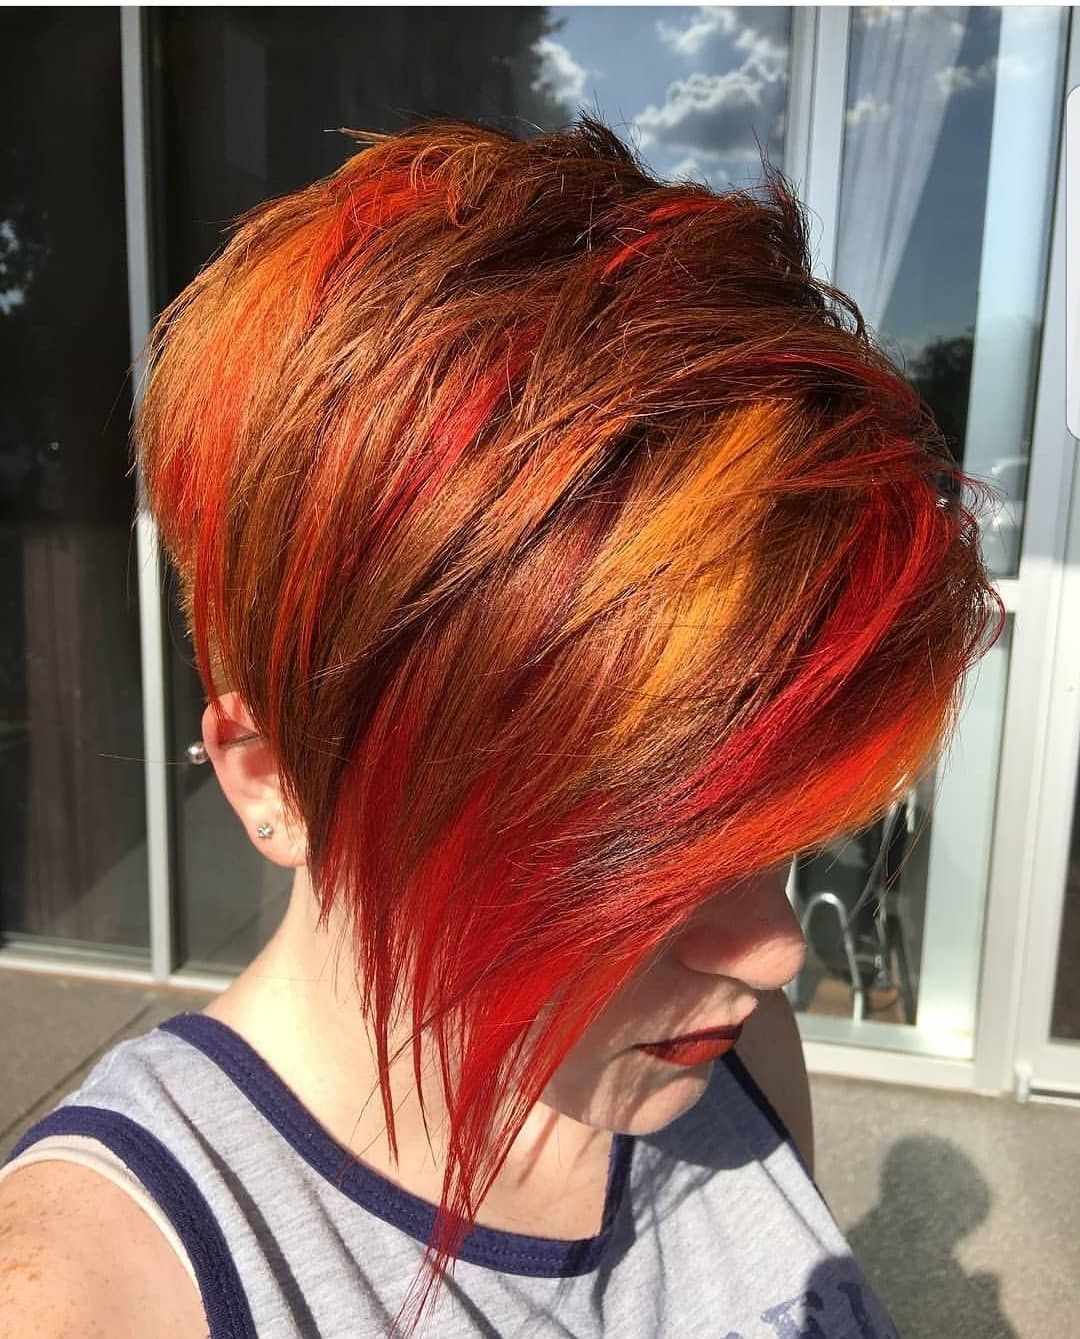 10 Beautiful Asymmetrical Short Pixie Haircuts & Hairstyles, Women Pertaining To 2018 Shaggy Pixie Haircuts In Red Hues (View 15 of 15)